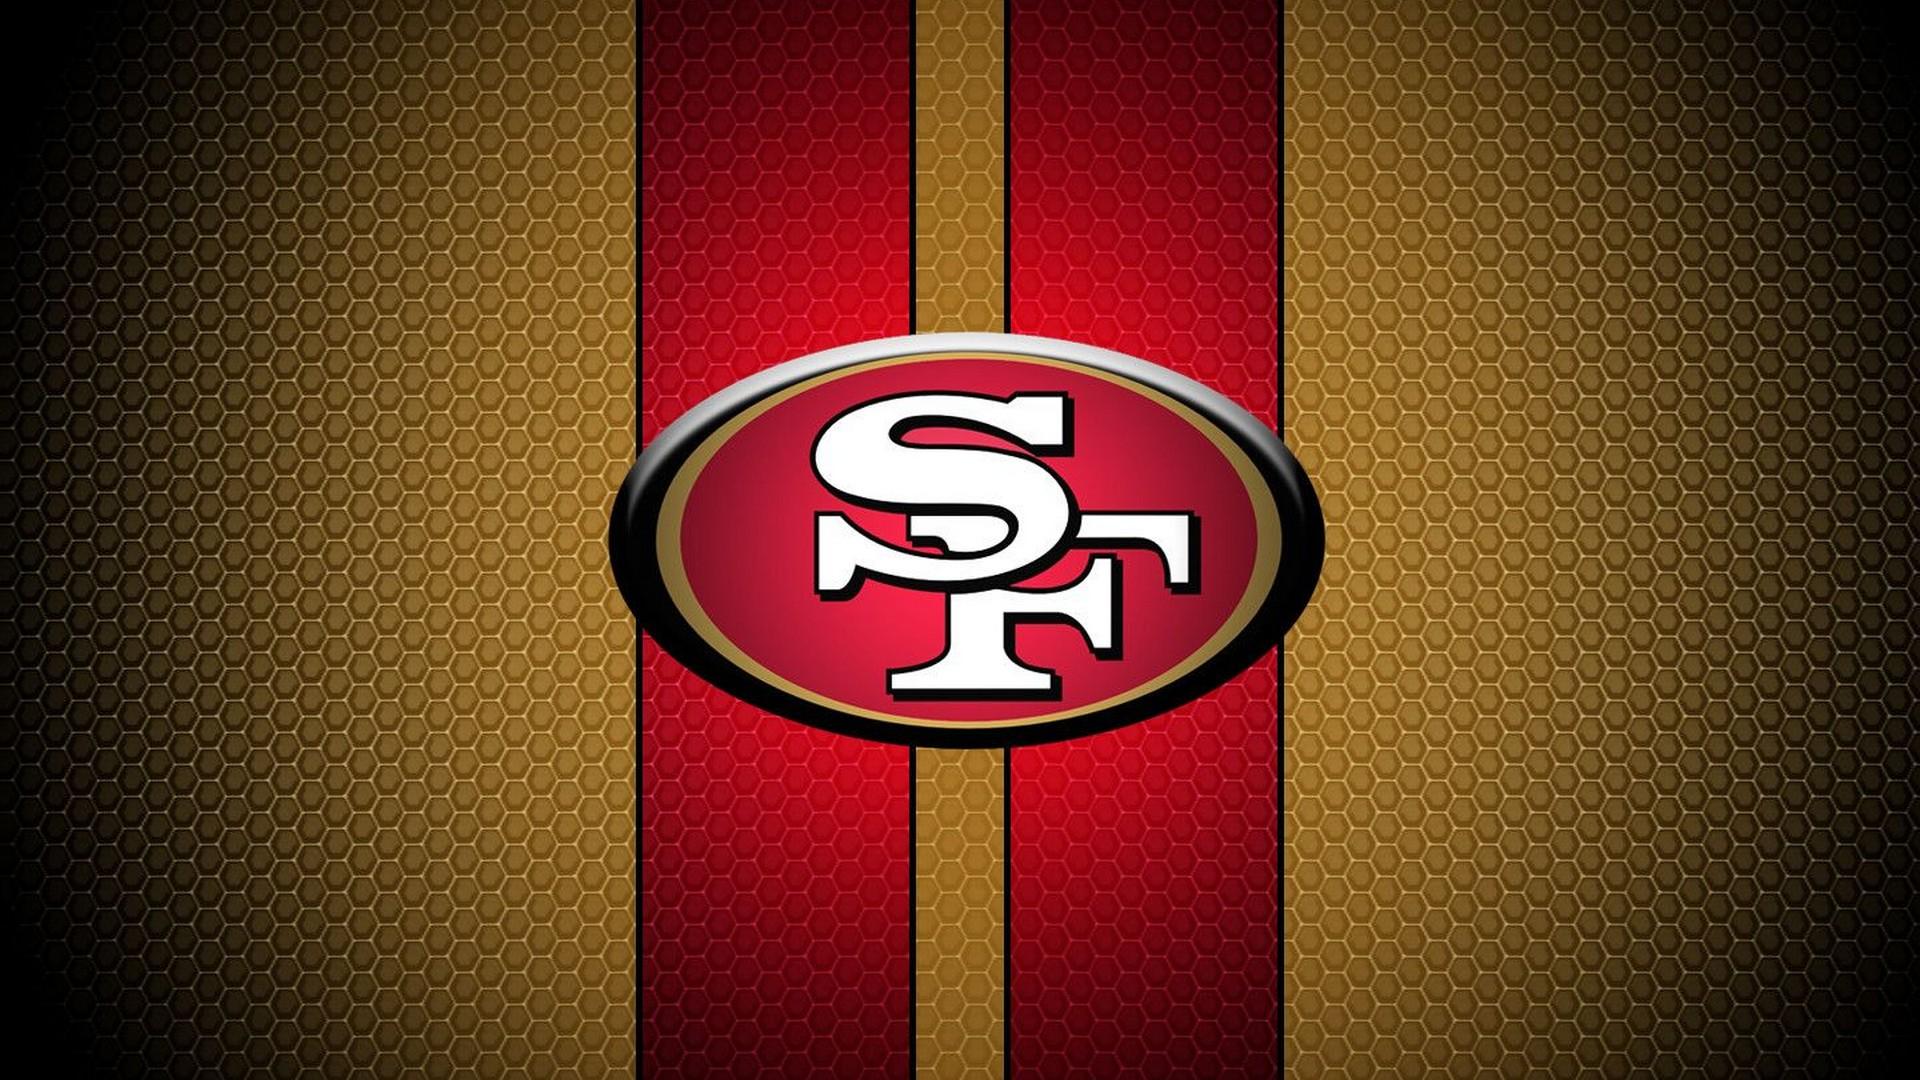 San Francisco 49ers For PC Wallpaper NFL Football